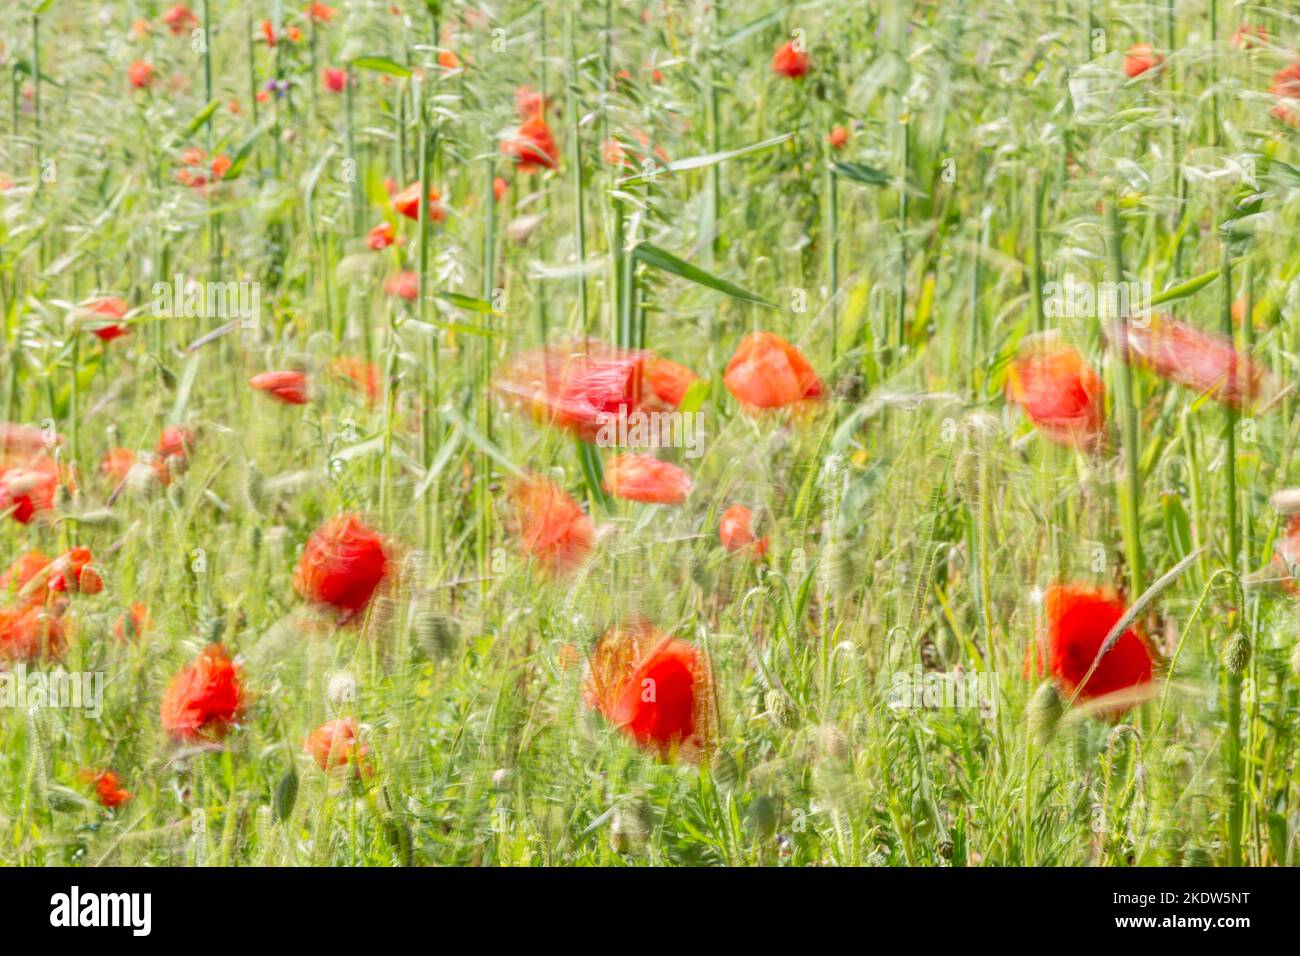 An abstract photograph of poppies in a field, with blured motion Stock Photo